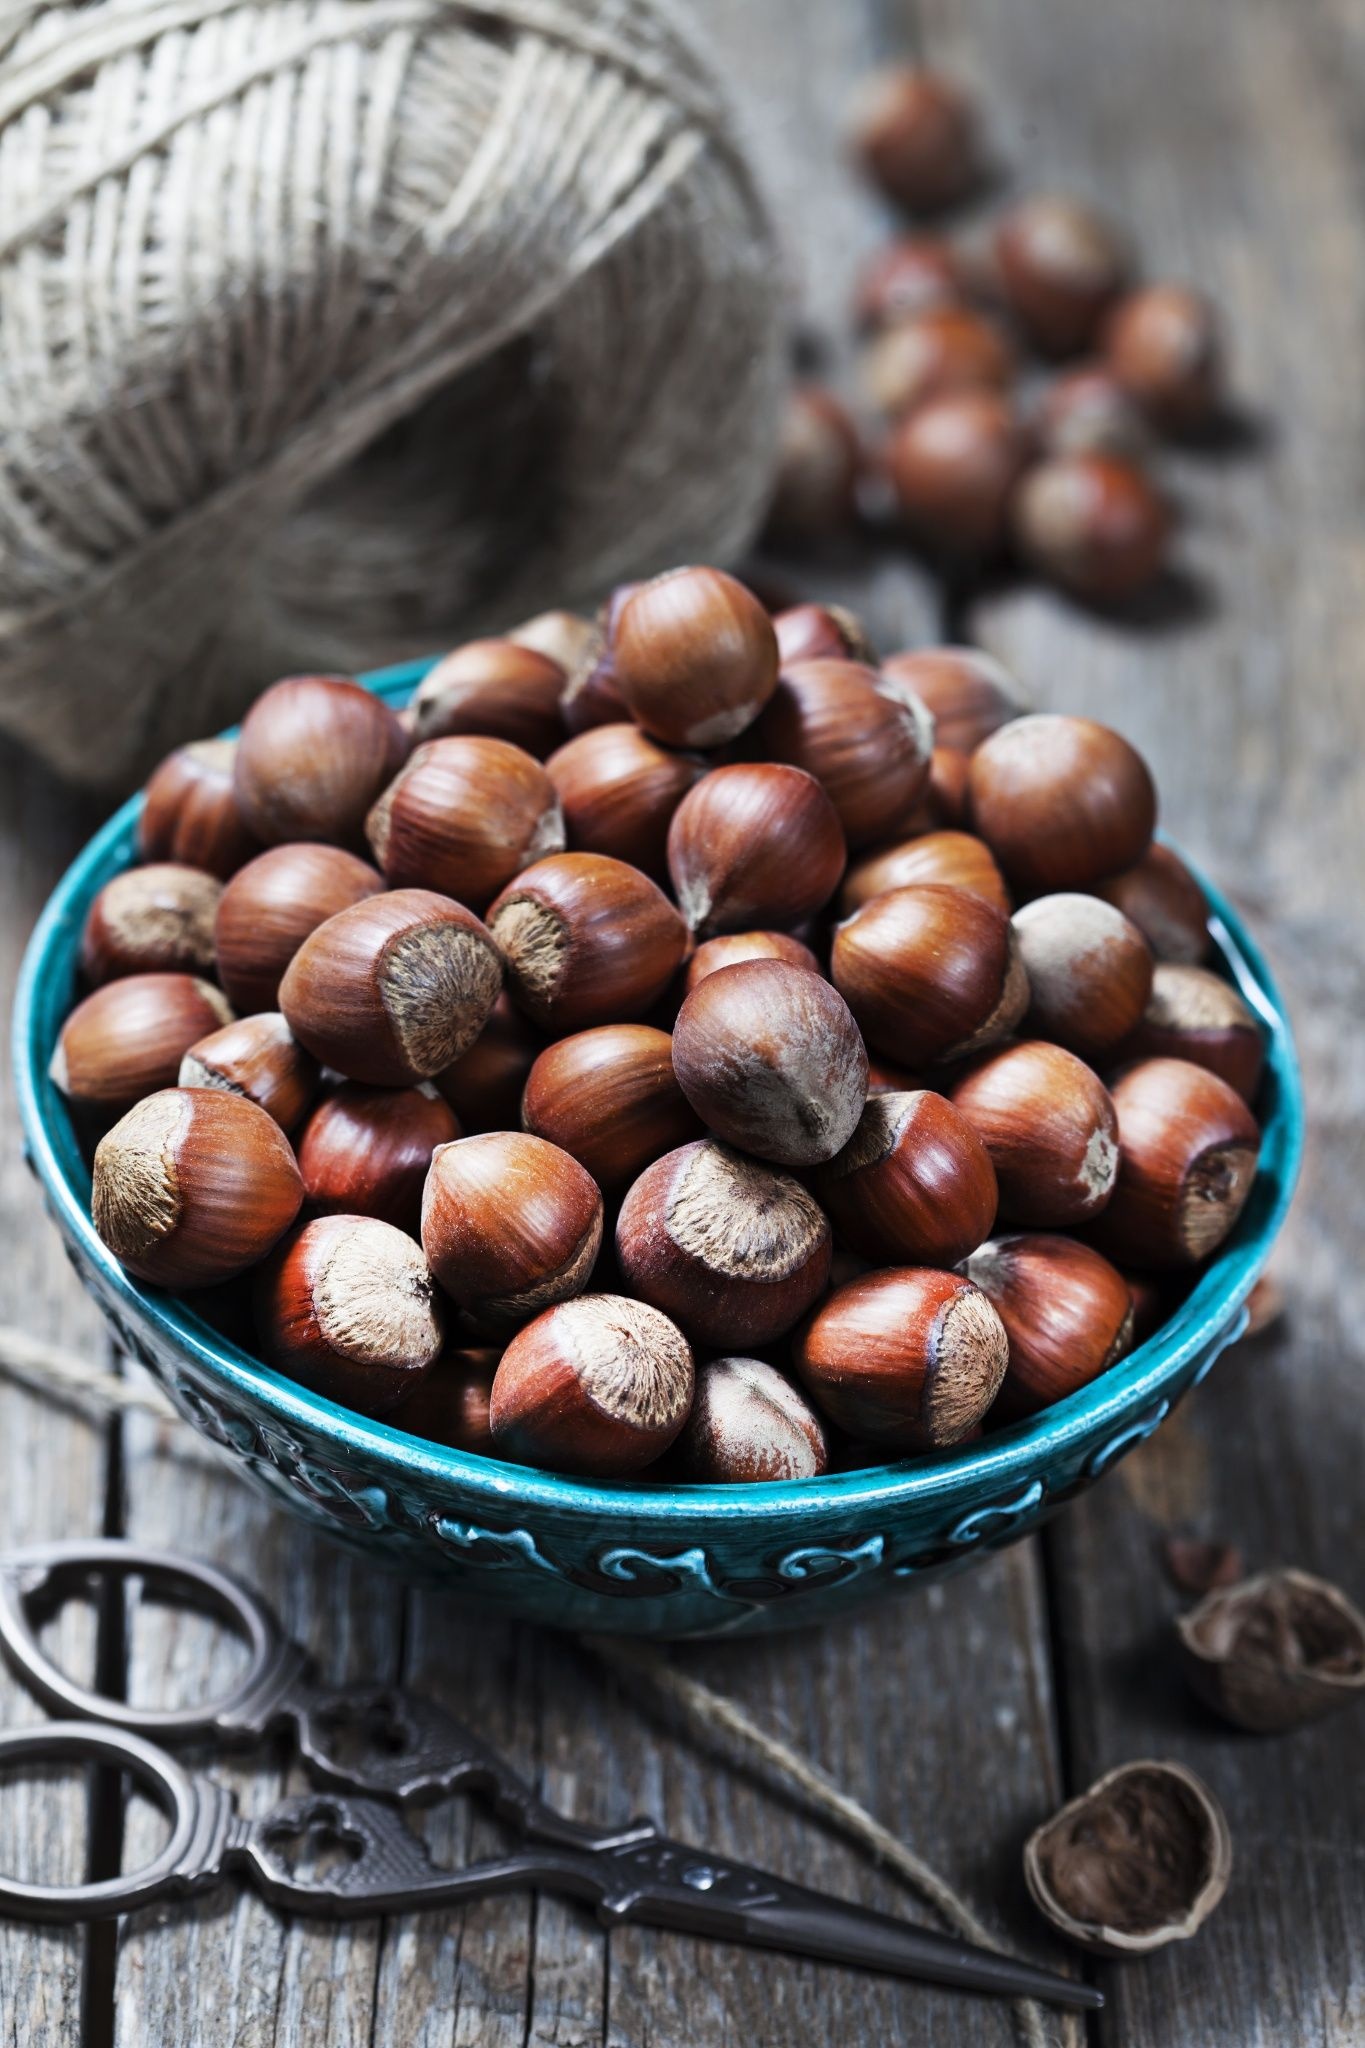 Hazelnuts: Food, Exceptionally rich in folate, and an excellent source of vitamin E. 1370x2050 HD Wallpaper.